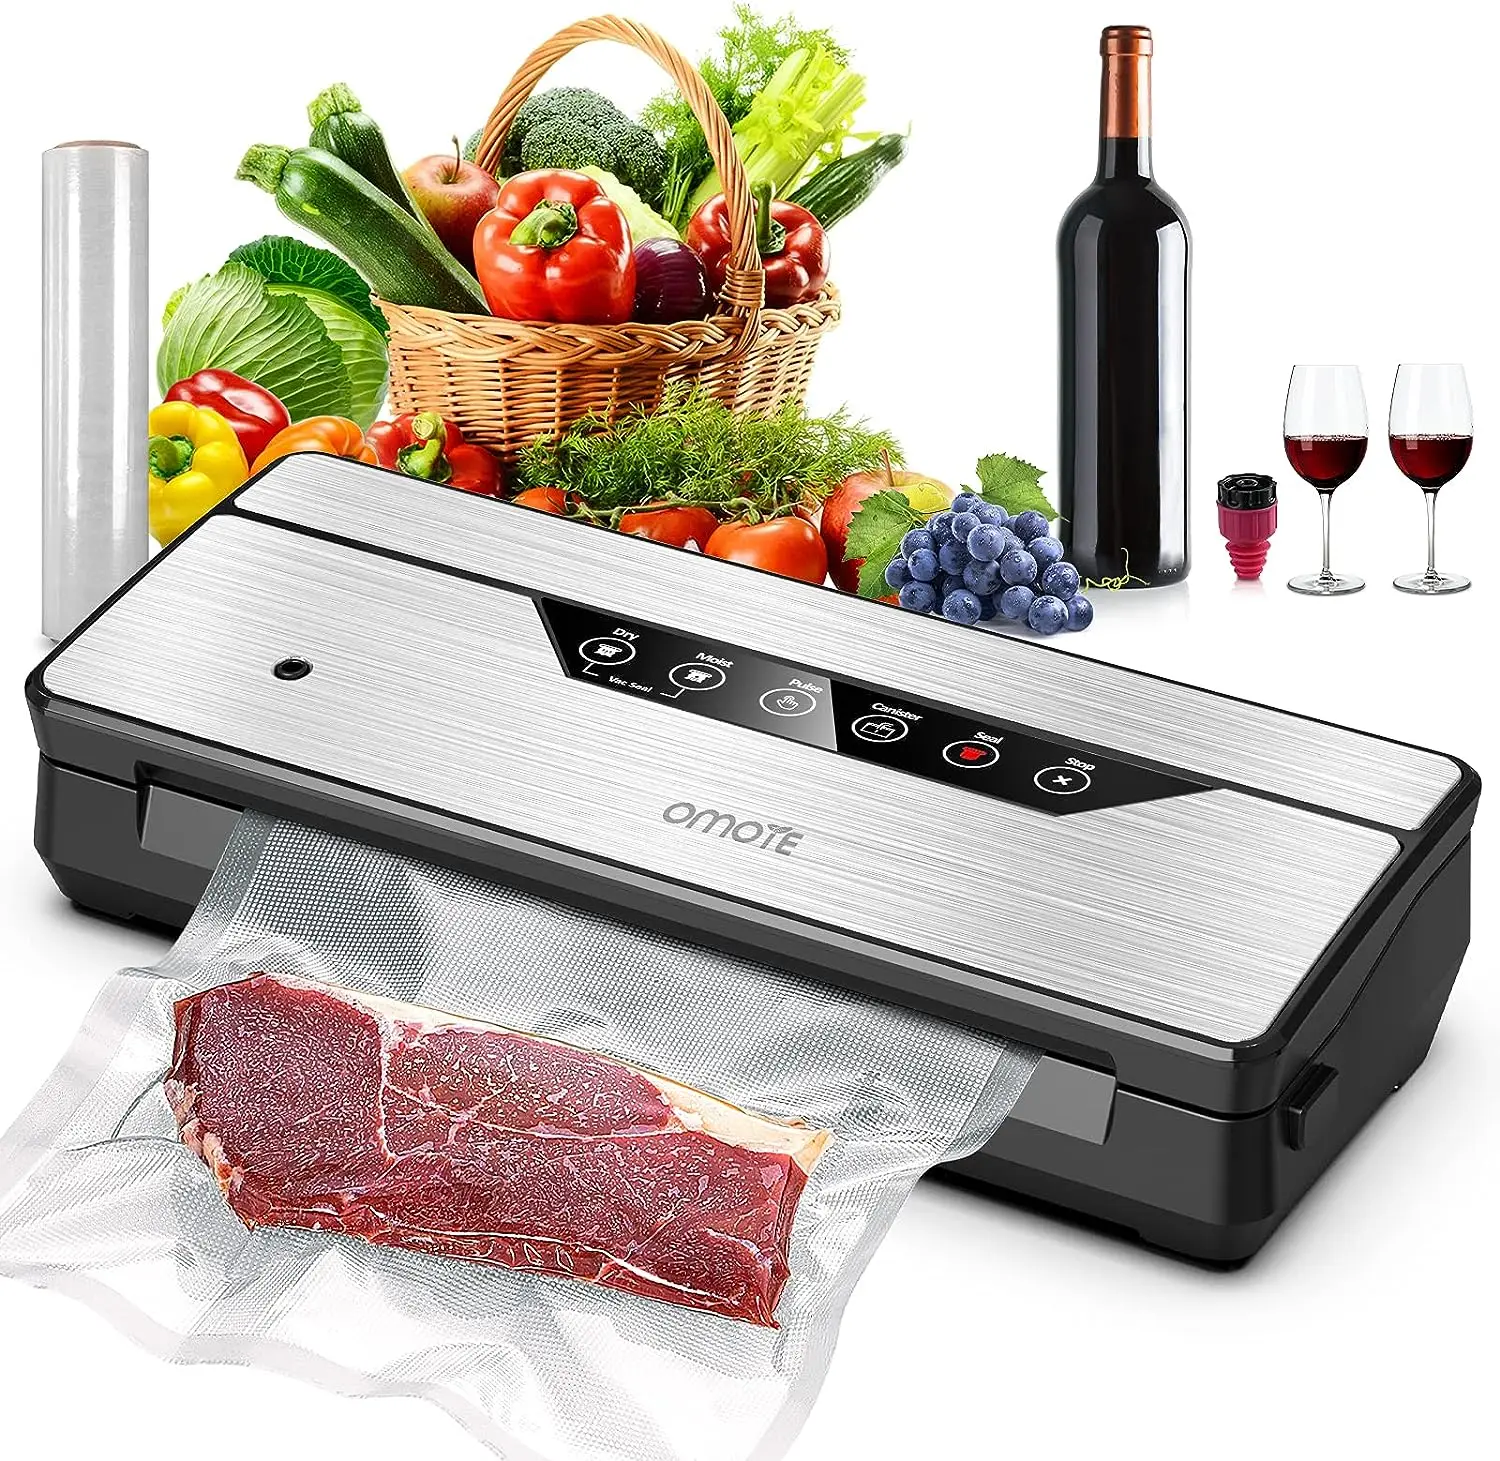 

Vacuum Sealer Machine, Dry, Moist & Pulse Modes for Food Storage, Handheld Portable Design, Easy to Operate with Built-in Cu